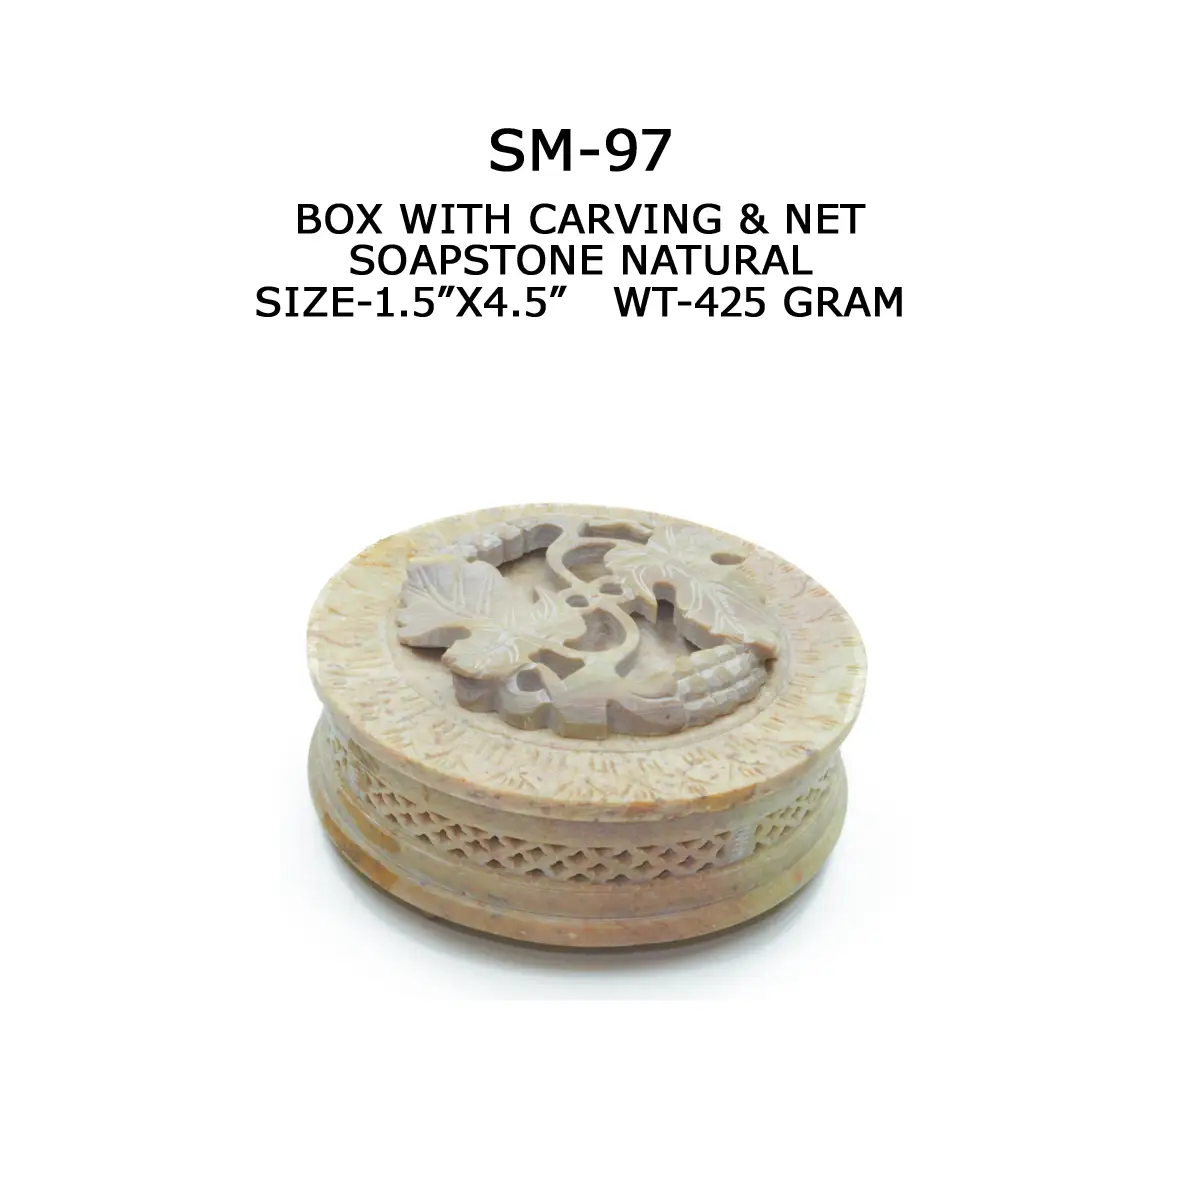 BOx WITH CARVING & NET SOAPSTONE NATURAL